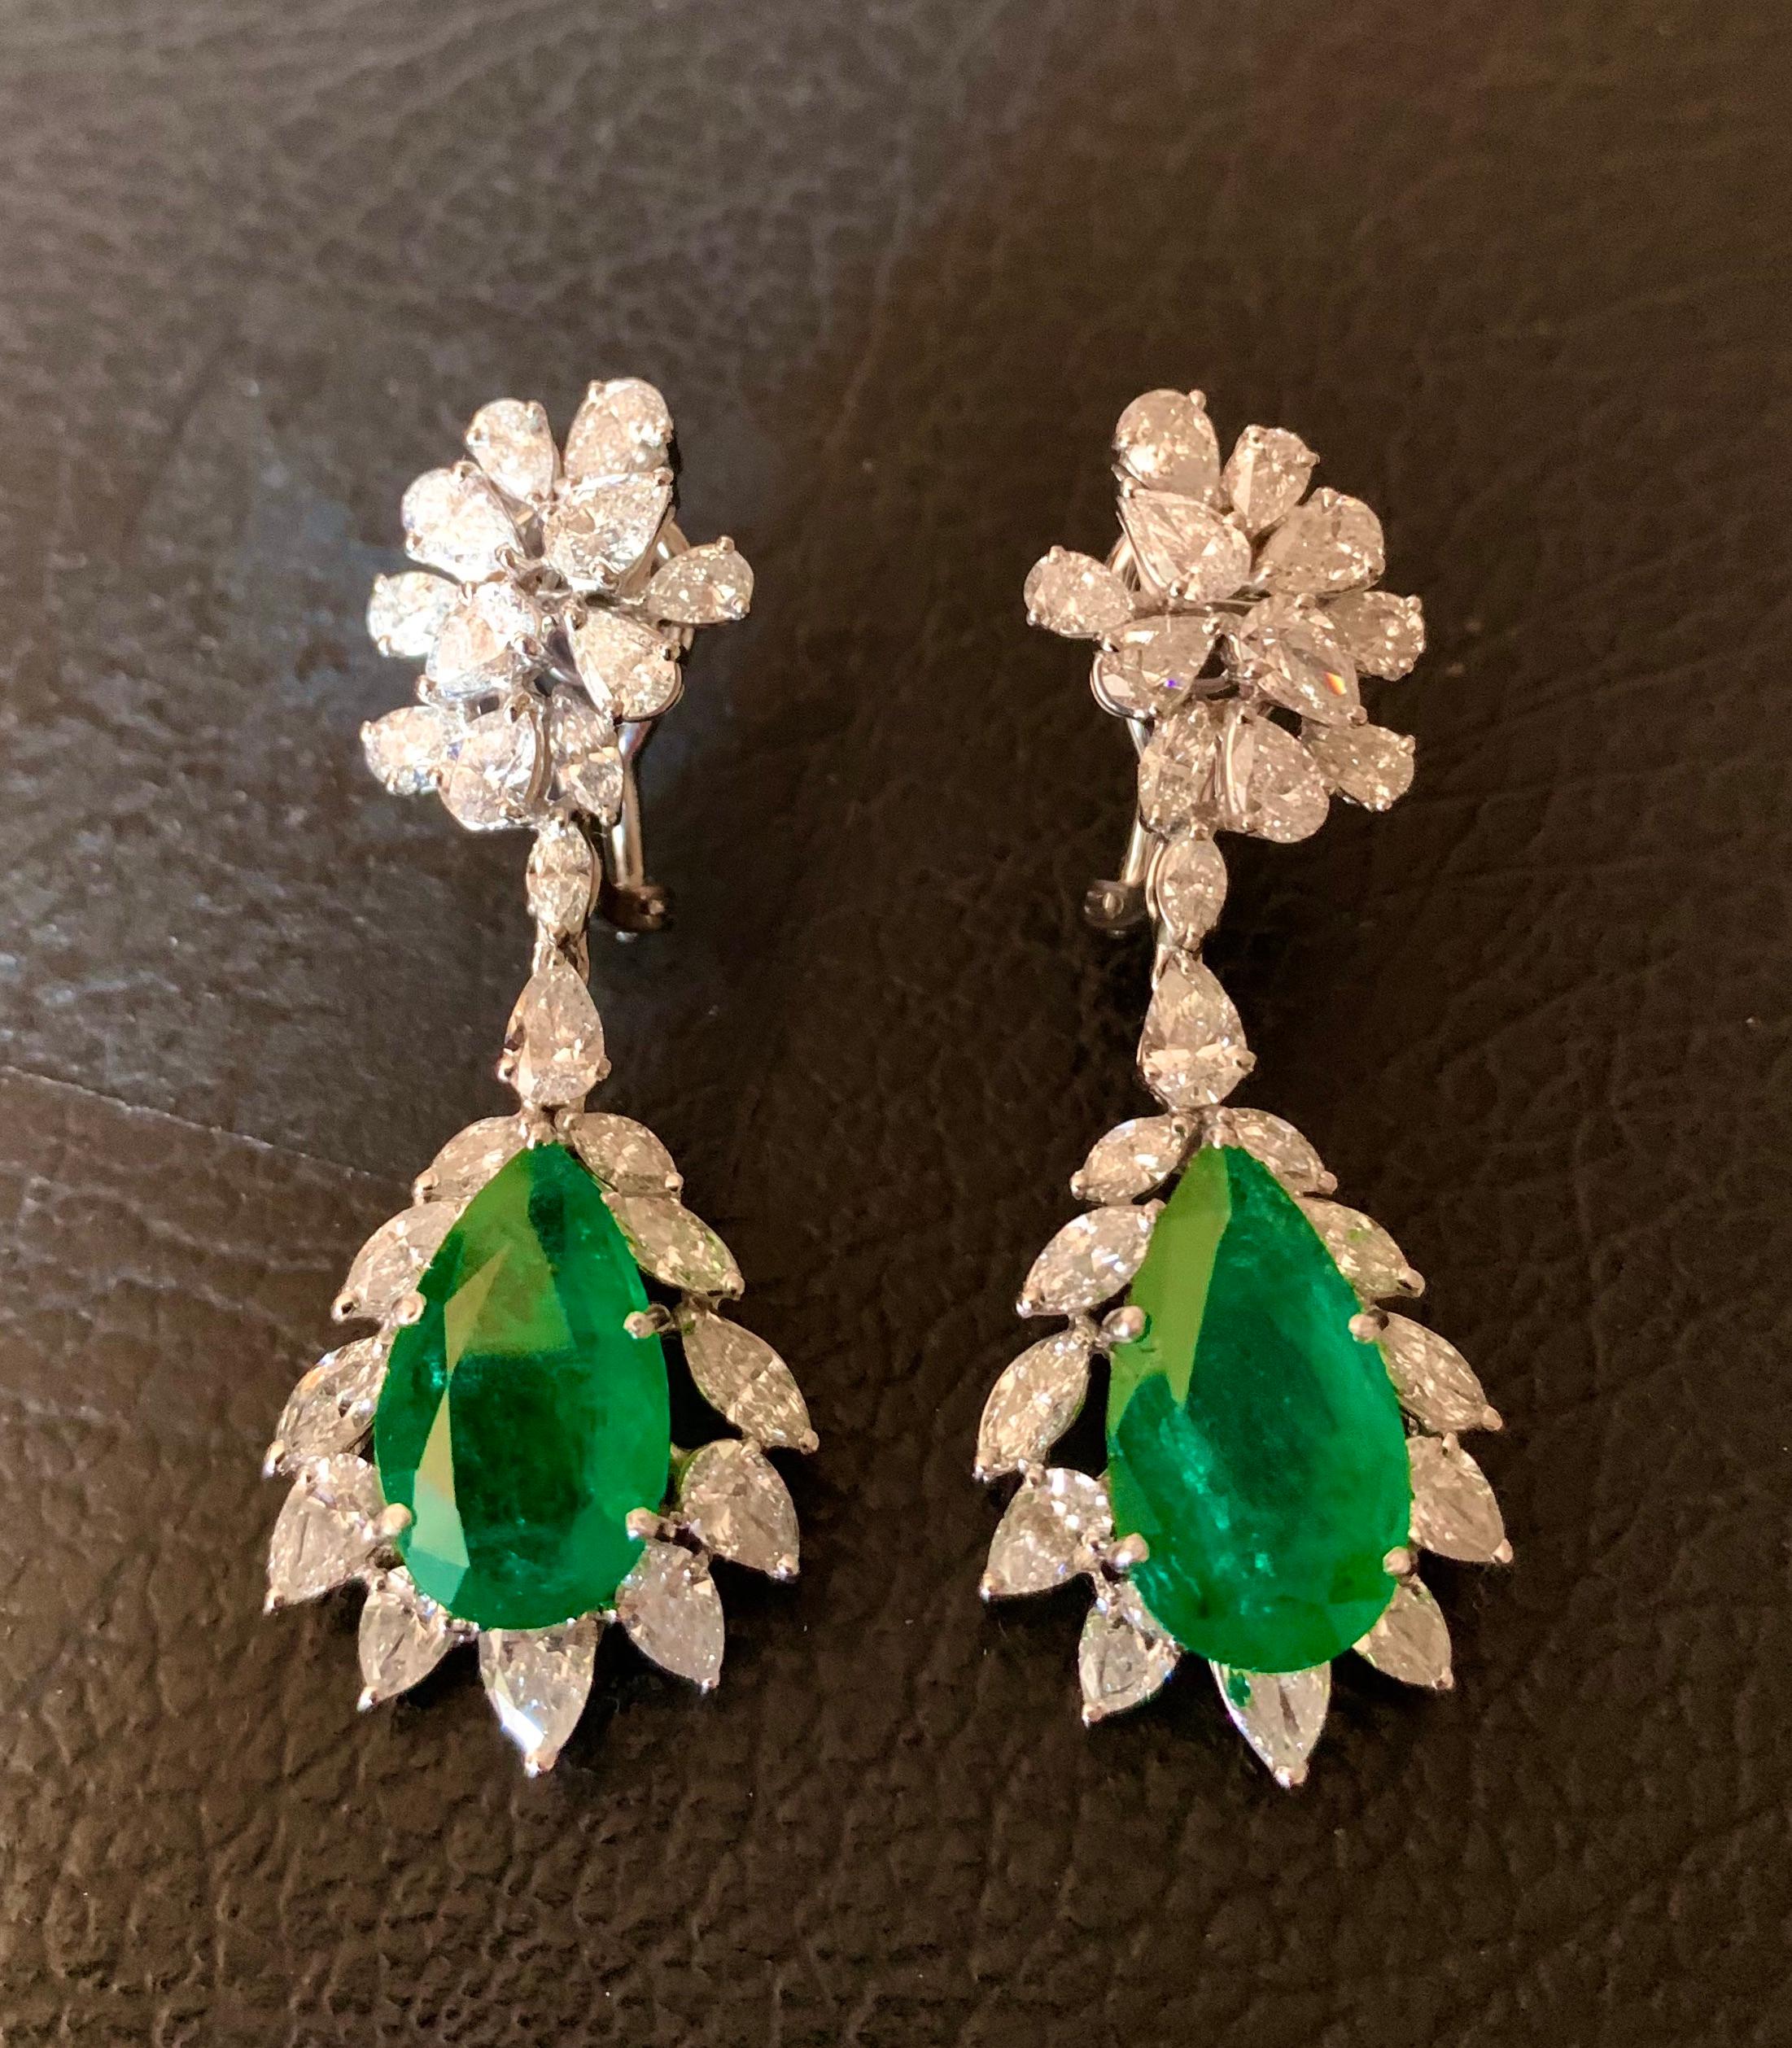 Long earrings in a modern classic style with a pair of pear cut emeralds and fantasy cut, pear and marquise cut diamonds.The emeralds are natural and are of 